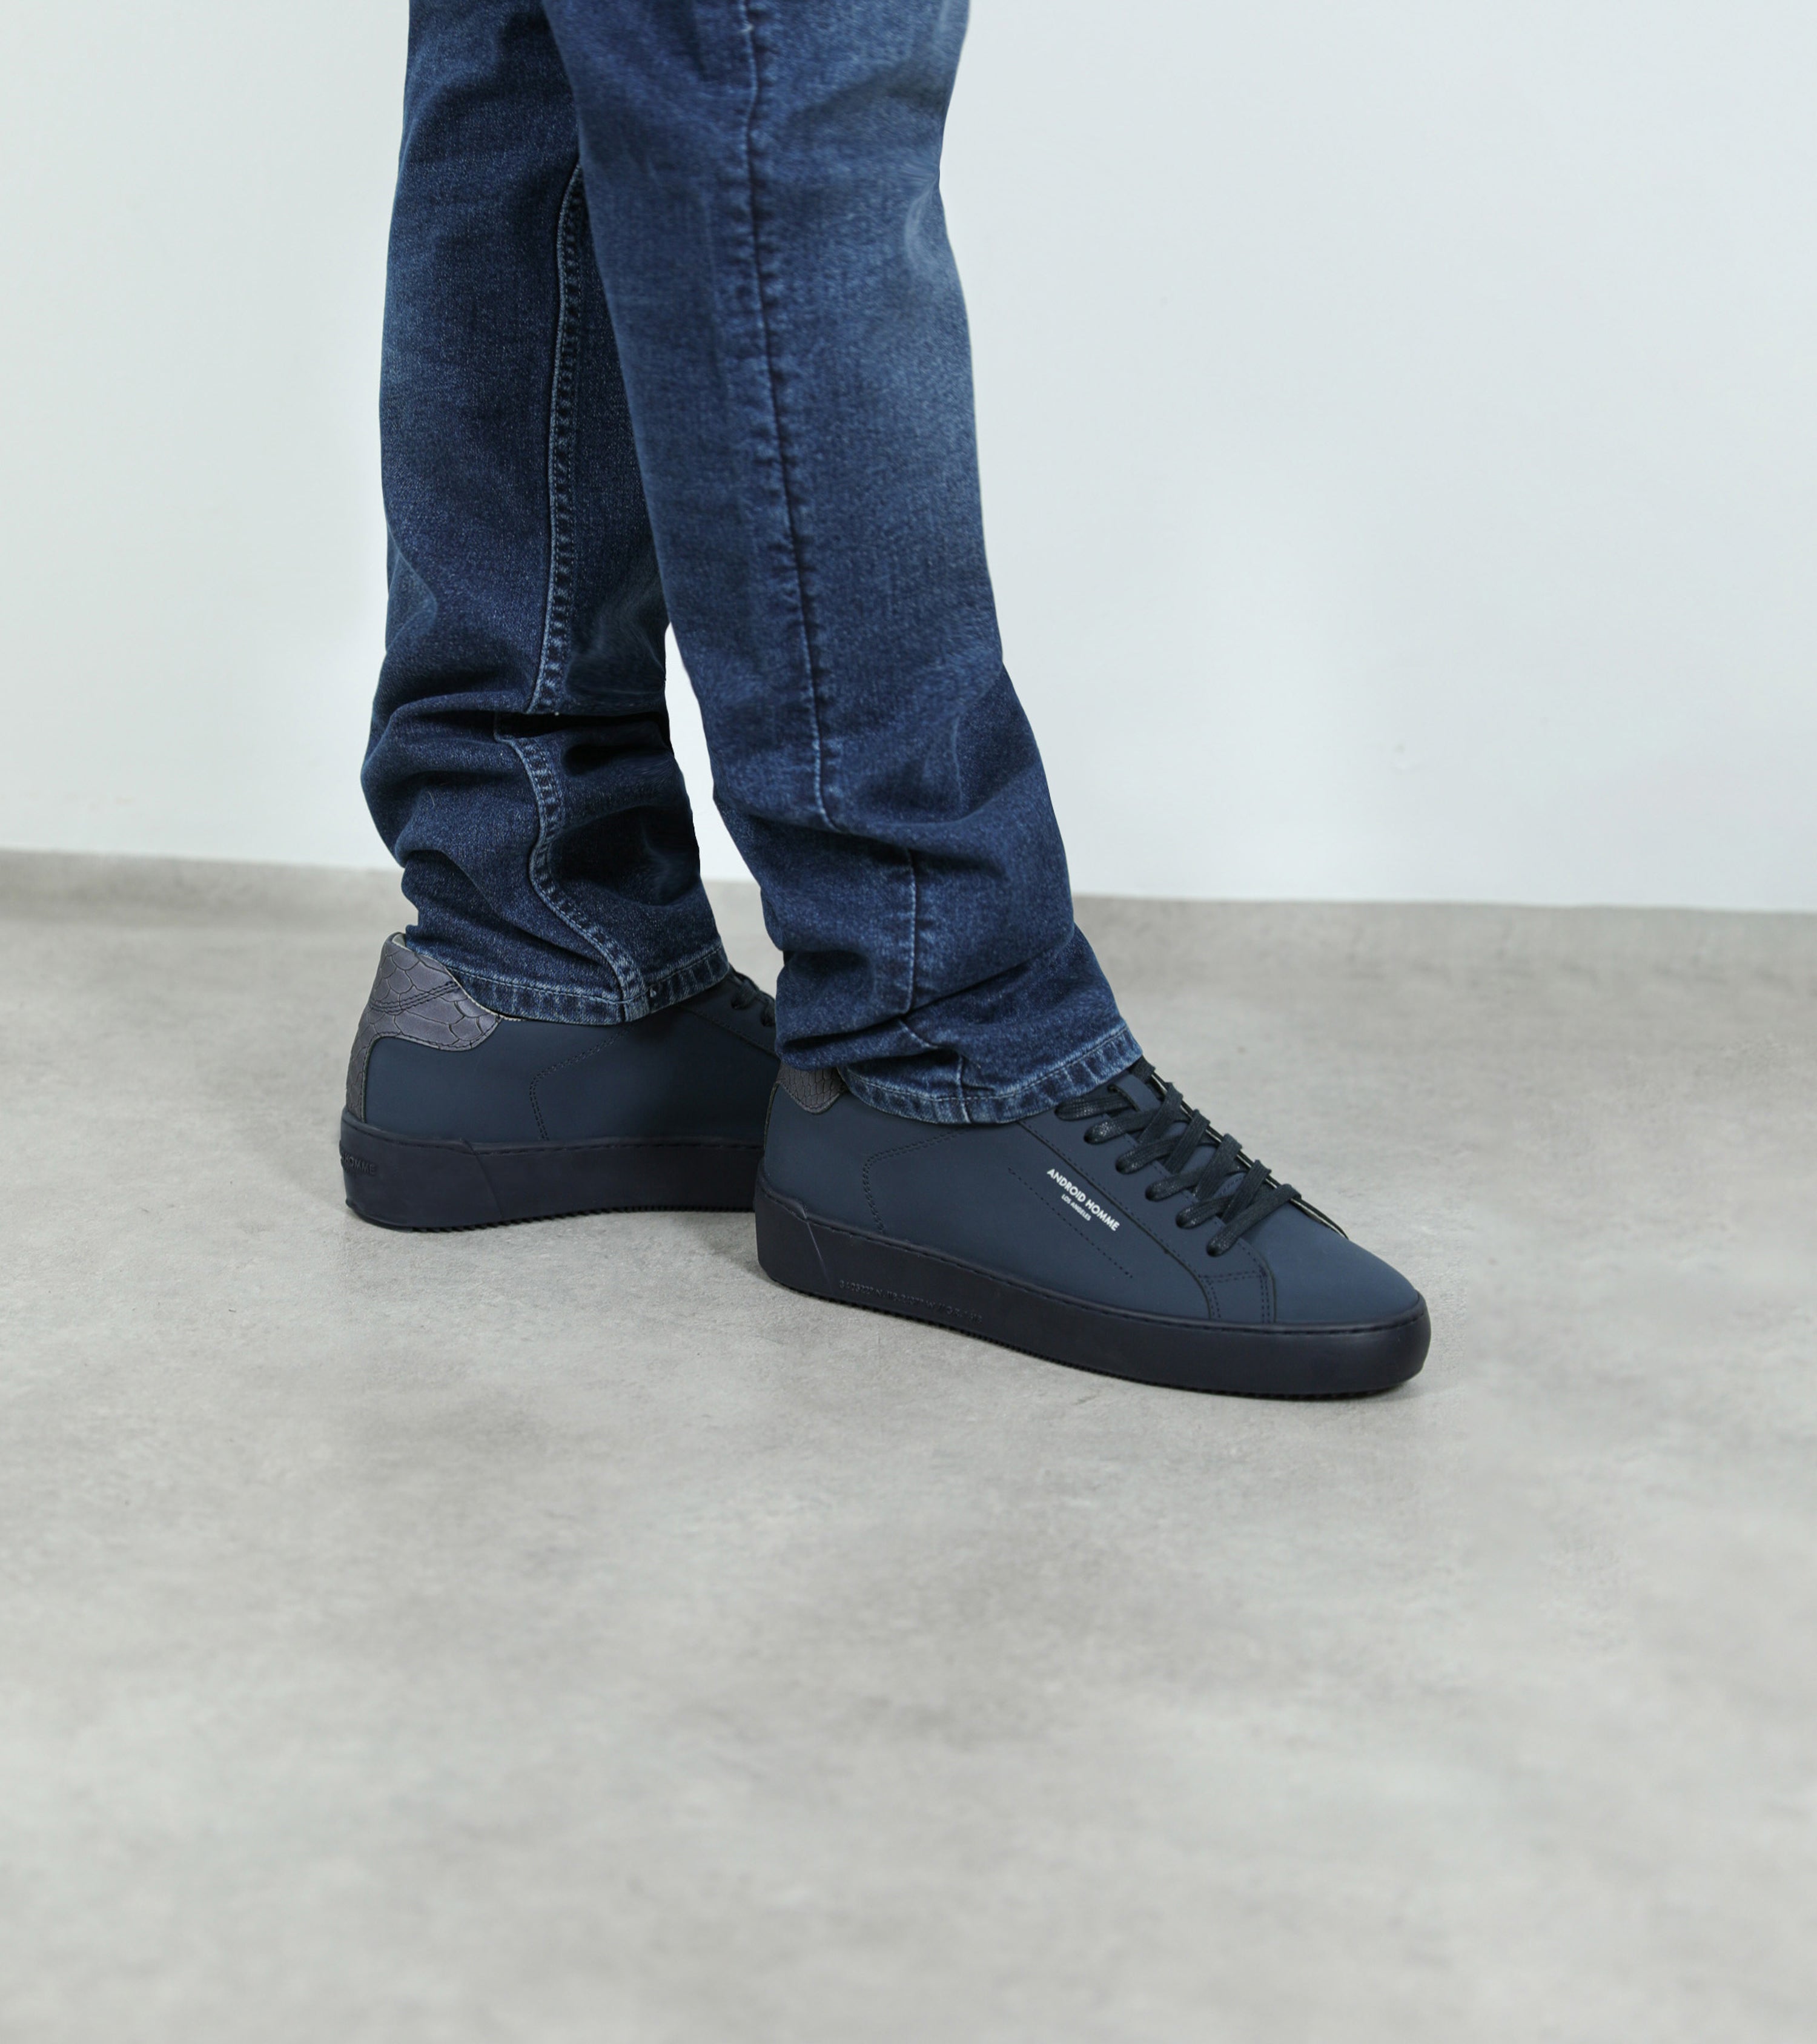 Ecom imagery of the Zuma Navy Gomma Reflective Python Android Homme Trainers on foot.